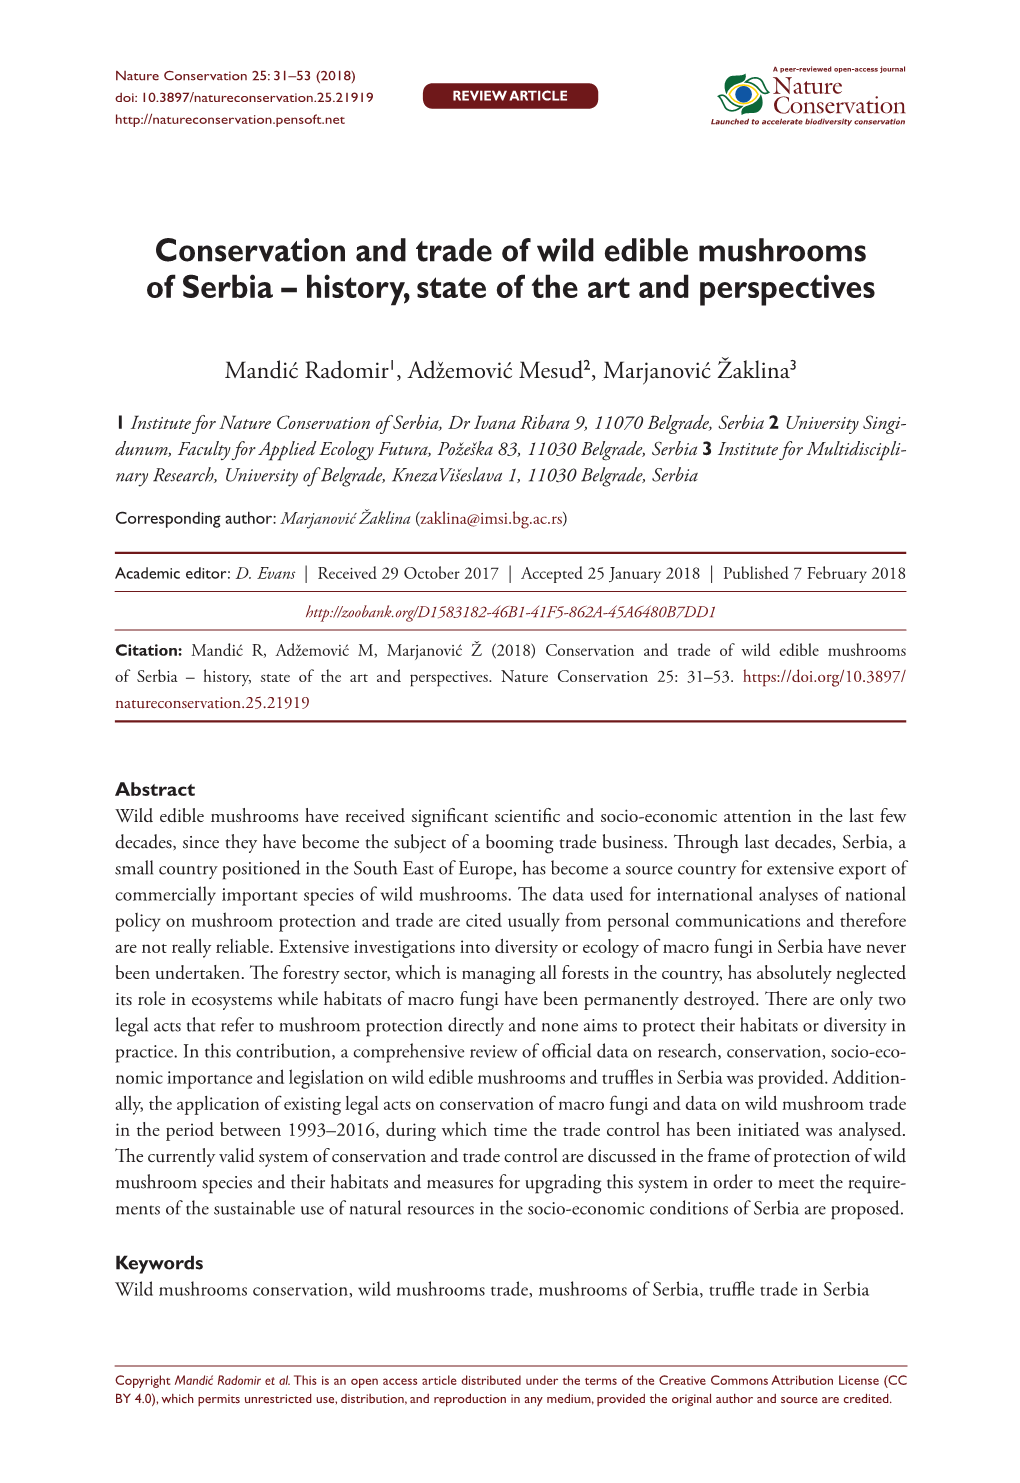 Conservation and Trade of Wild Edible Mushrooms of Serbia–History, State